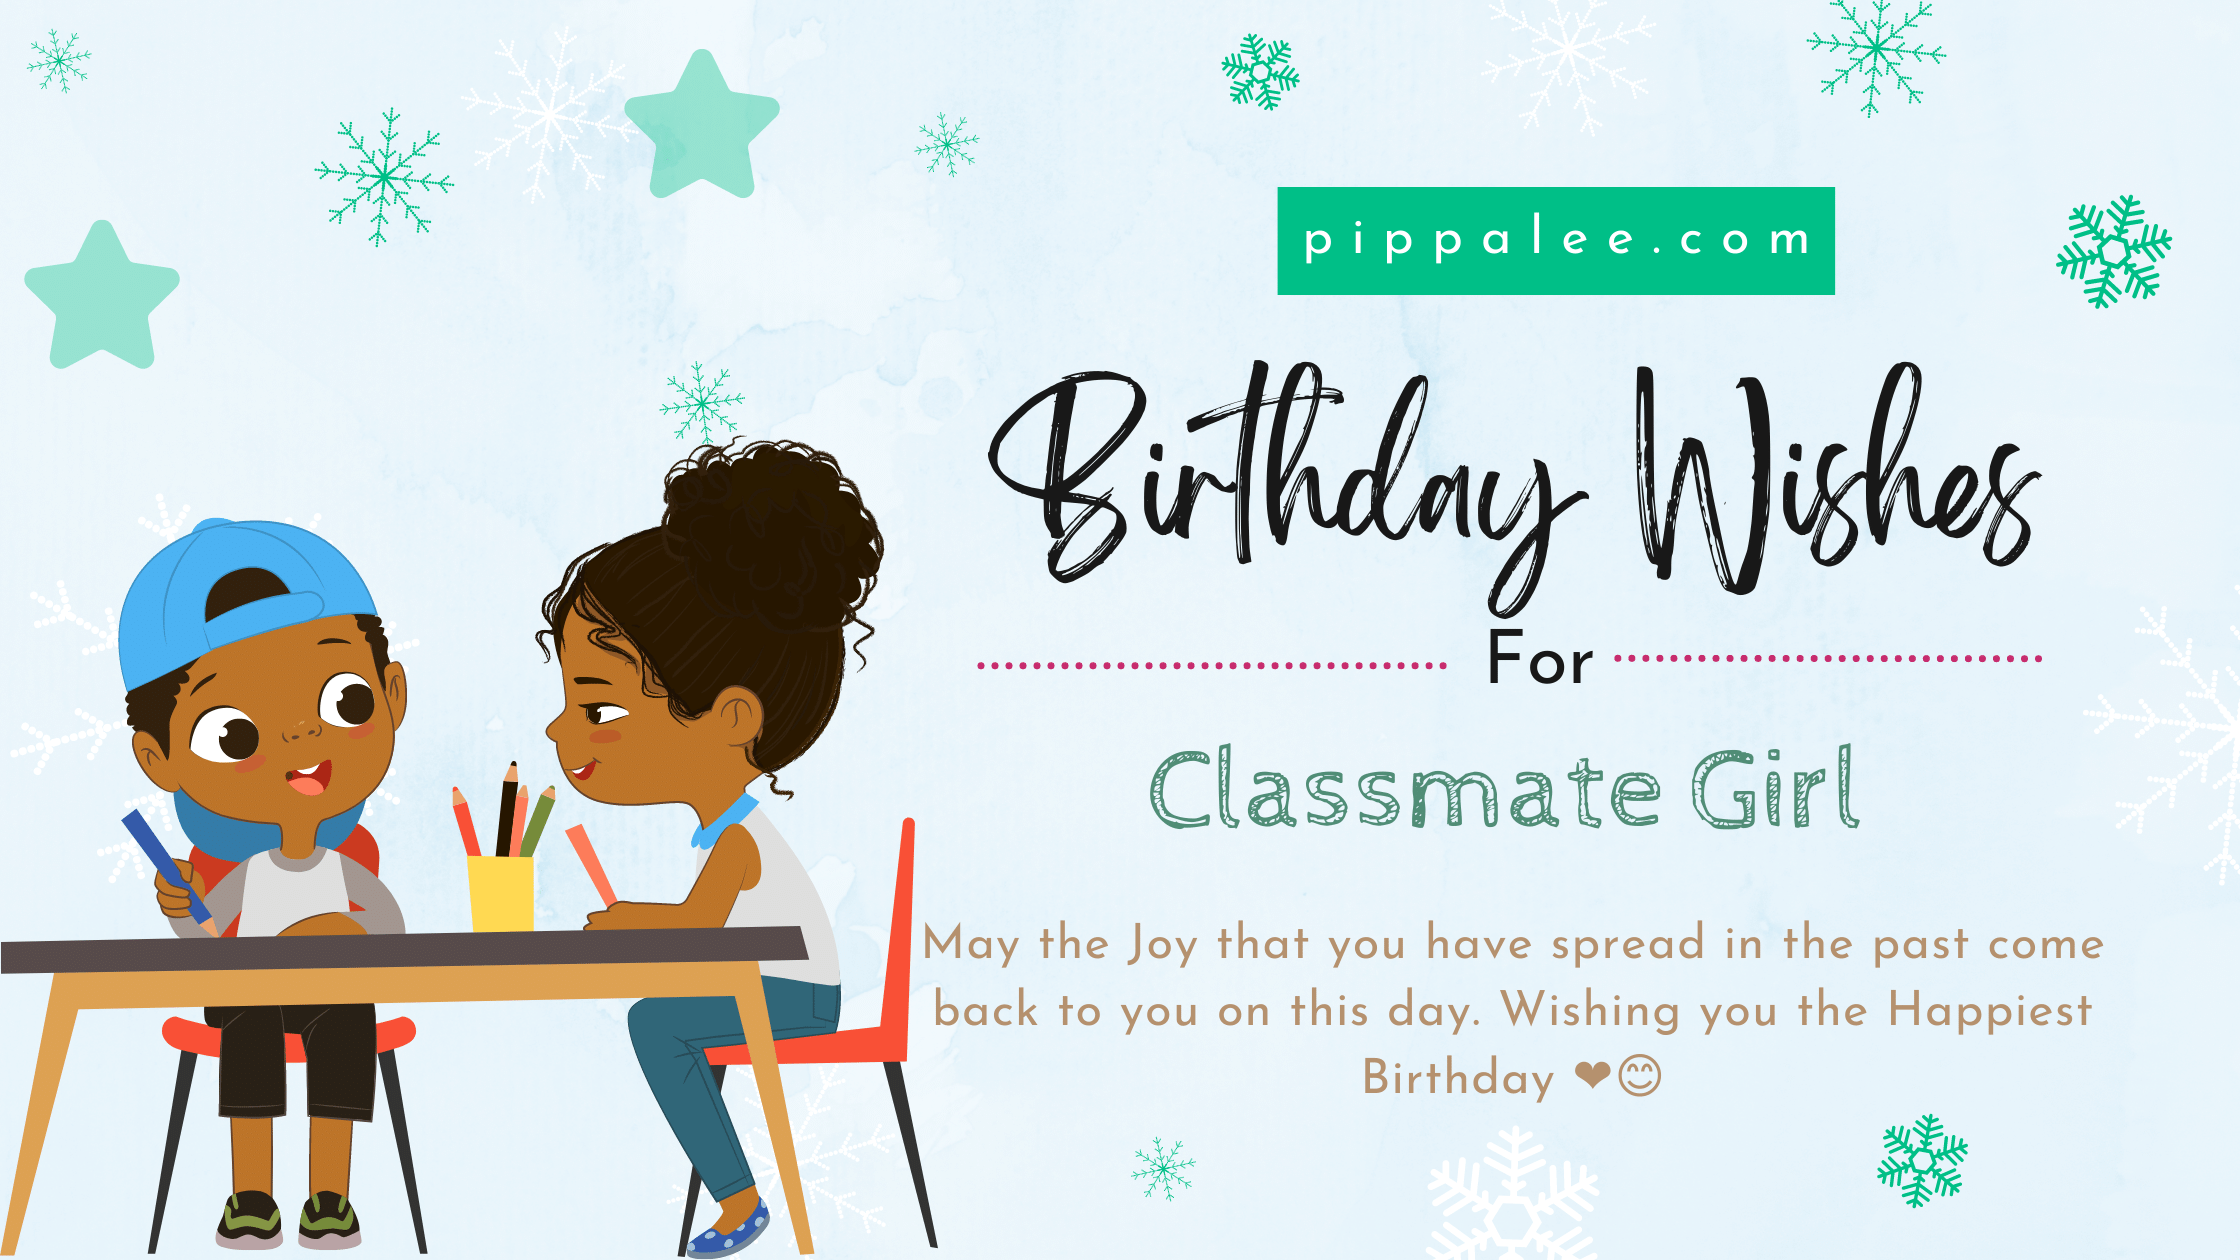 Birthday Wishes for Classmate Girl - Wishes & Messages